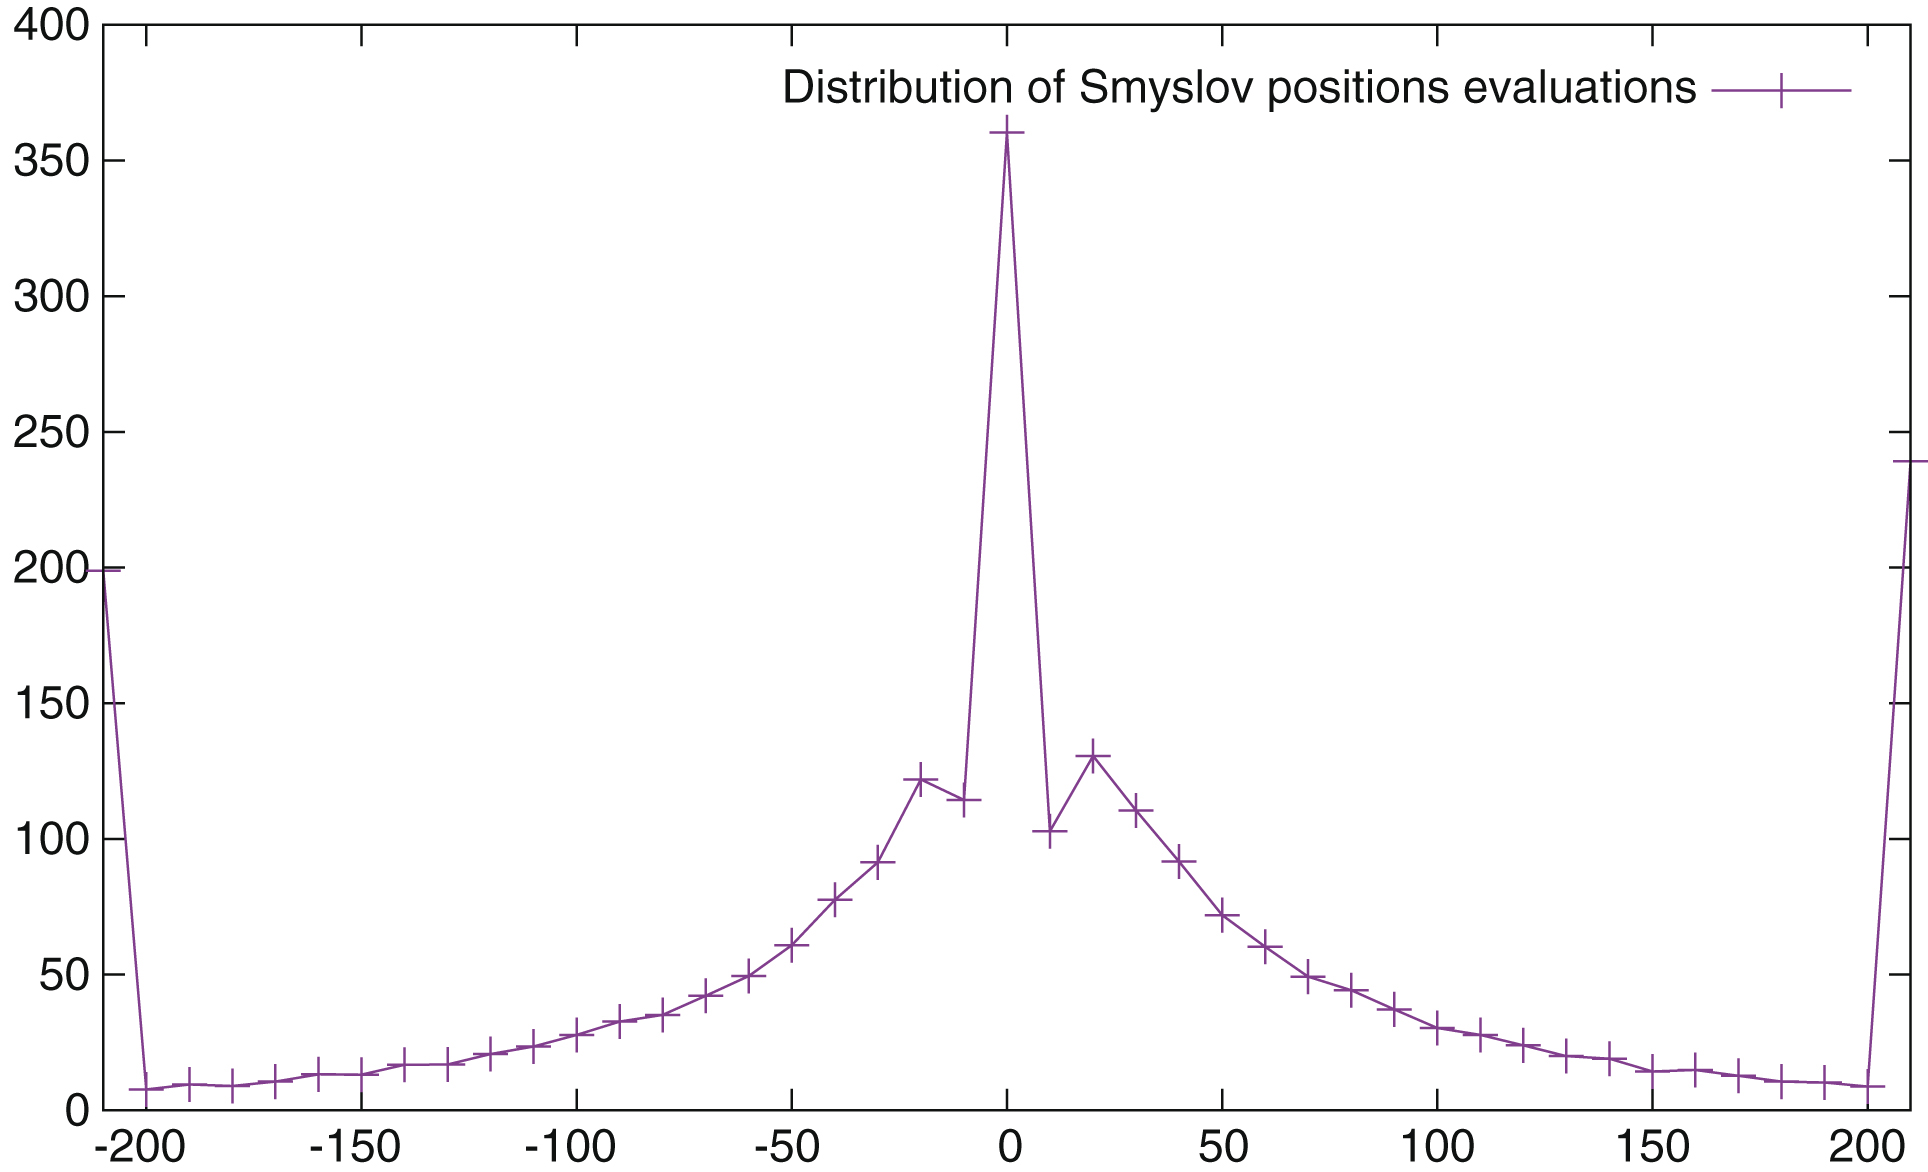 Average number of positions by year as a function of the evaluation of the positions.